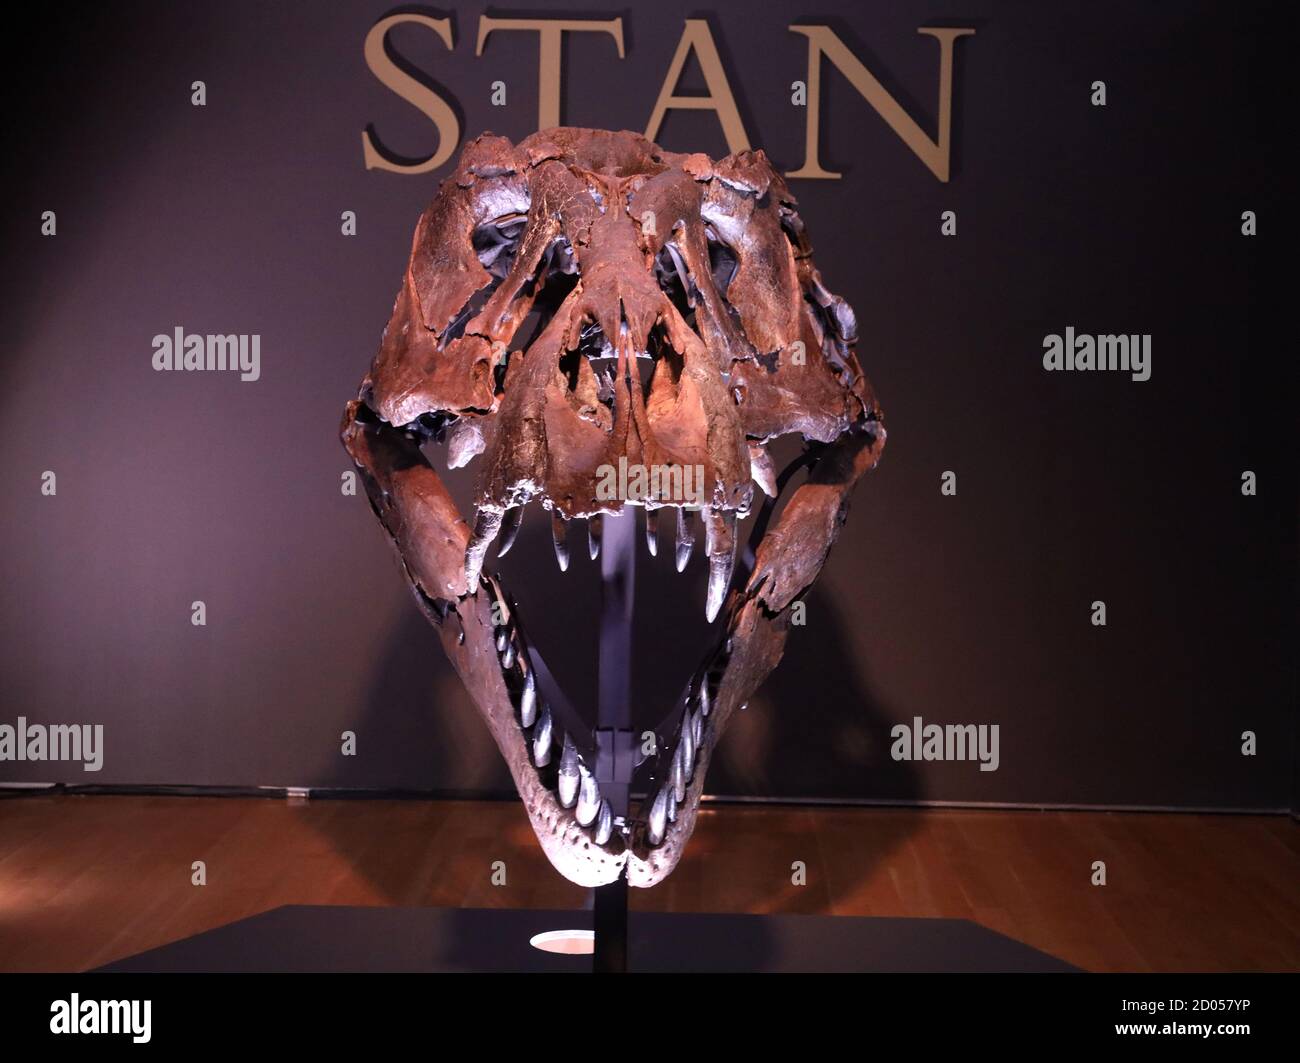 New York, New York, USA. 2nd Oct, 2020. A view of the original head of 'Stan the T.Rex' King of the Dinosaurs which is too heavy to be mounted, seen at at Christie's auction house. The most complete Tyrannosaurus Rex Skeleton on Earth will be auctioned on October 6 and is expected to go for $6-8 million dollars. The enormous scale of STANÃs skeleton Ã 13 feet high and 40 feet long with the tail outstretched Ã demonstrates the behemoth size of the Tyrannosaurus rex. With 188 original bones, STAN is one of the largest and most complete specimens known to exist. The first bones from the s Stock Photo